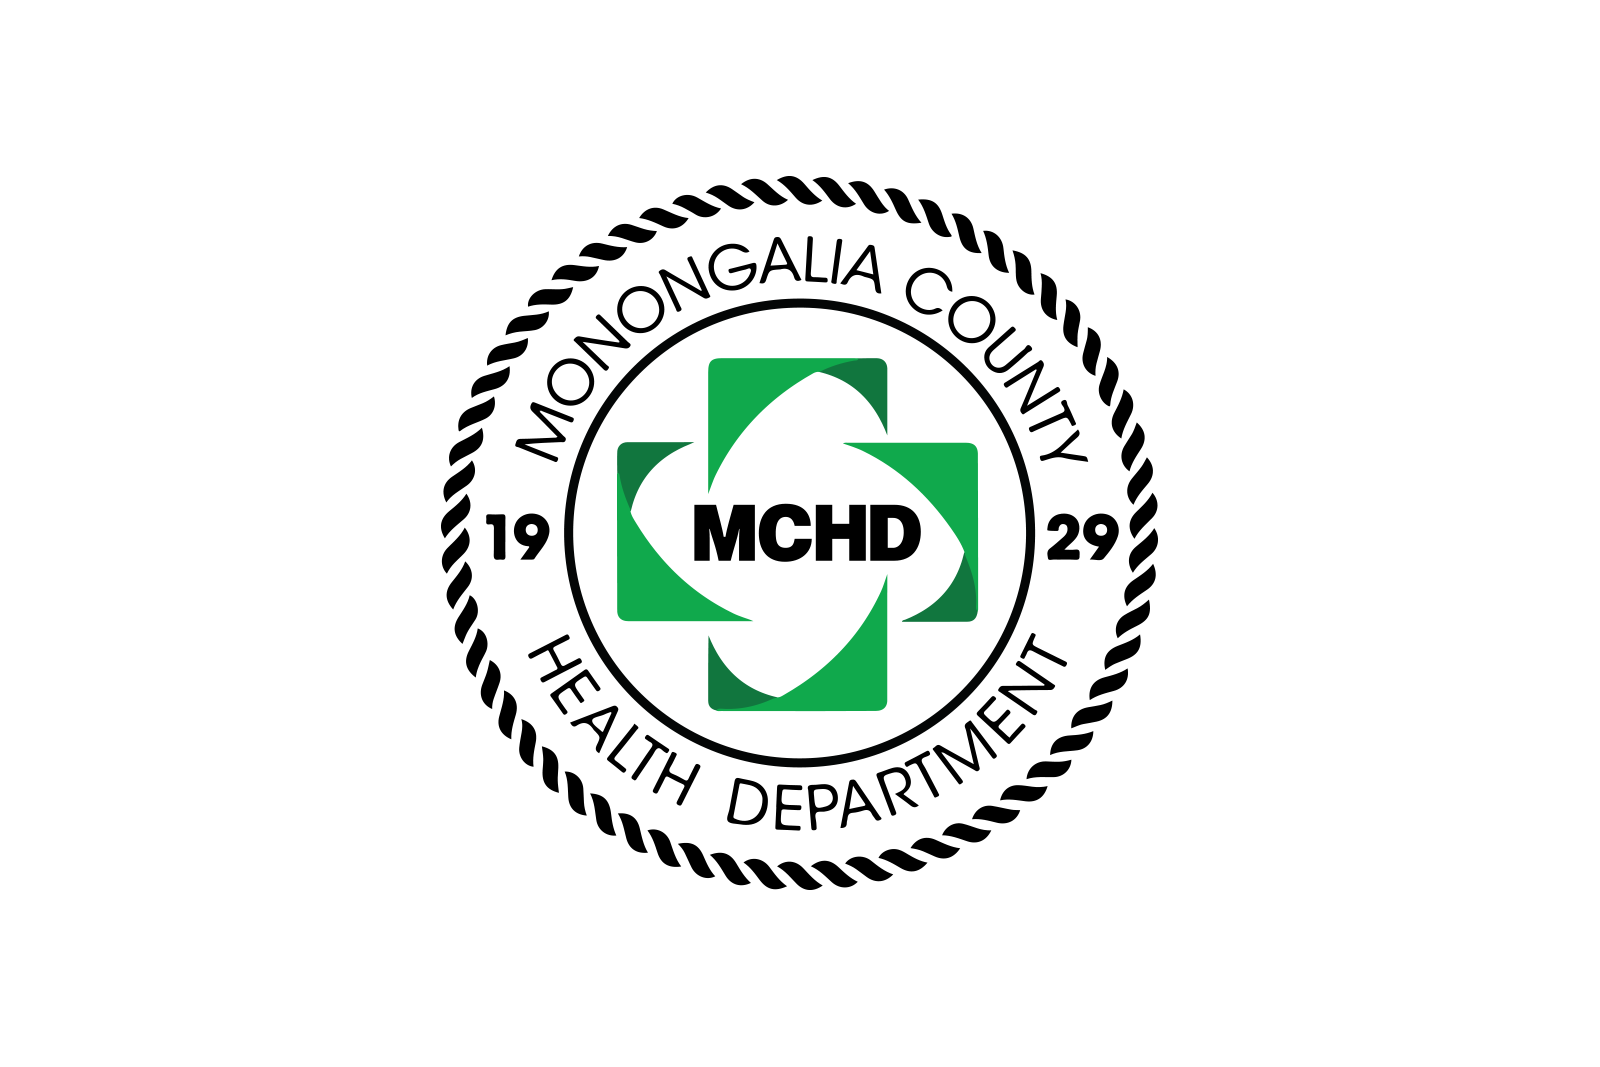 MCHD Board of Health meeting will be held at 9 a.m. Thursday, March 30